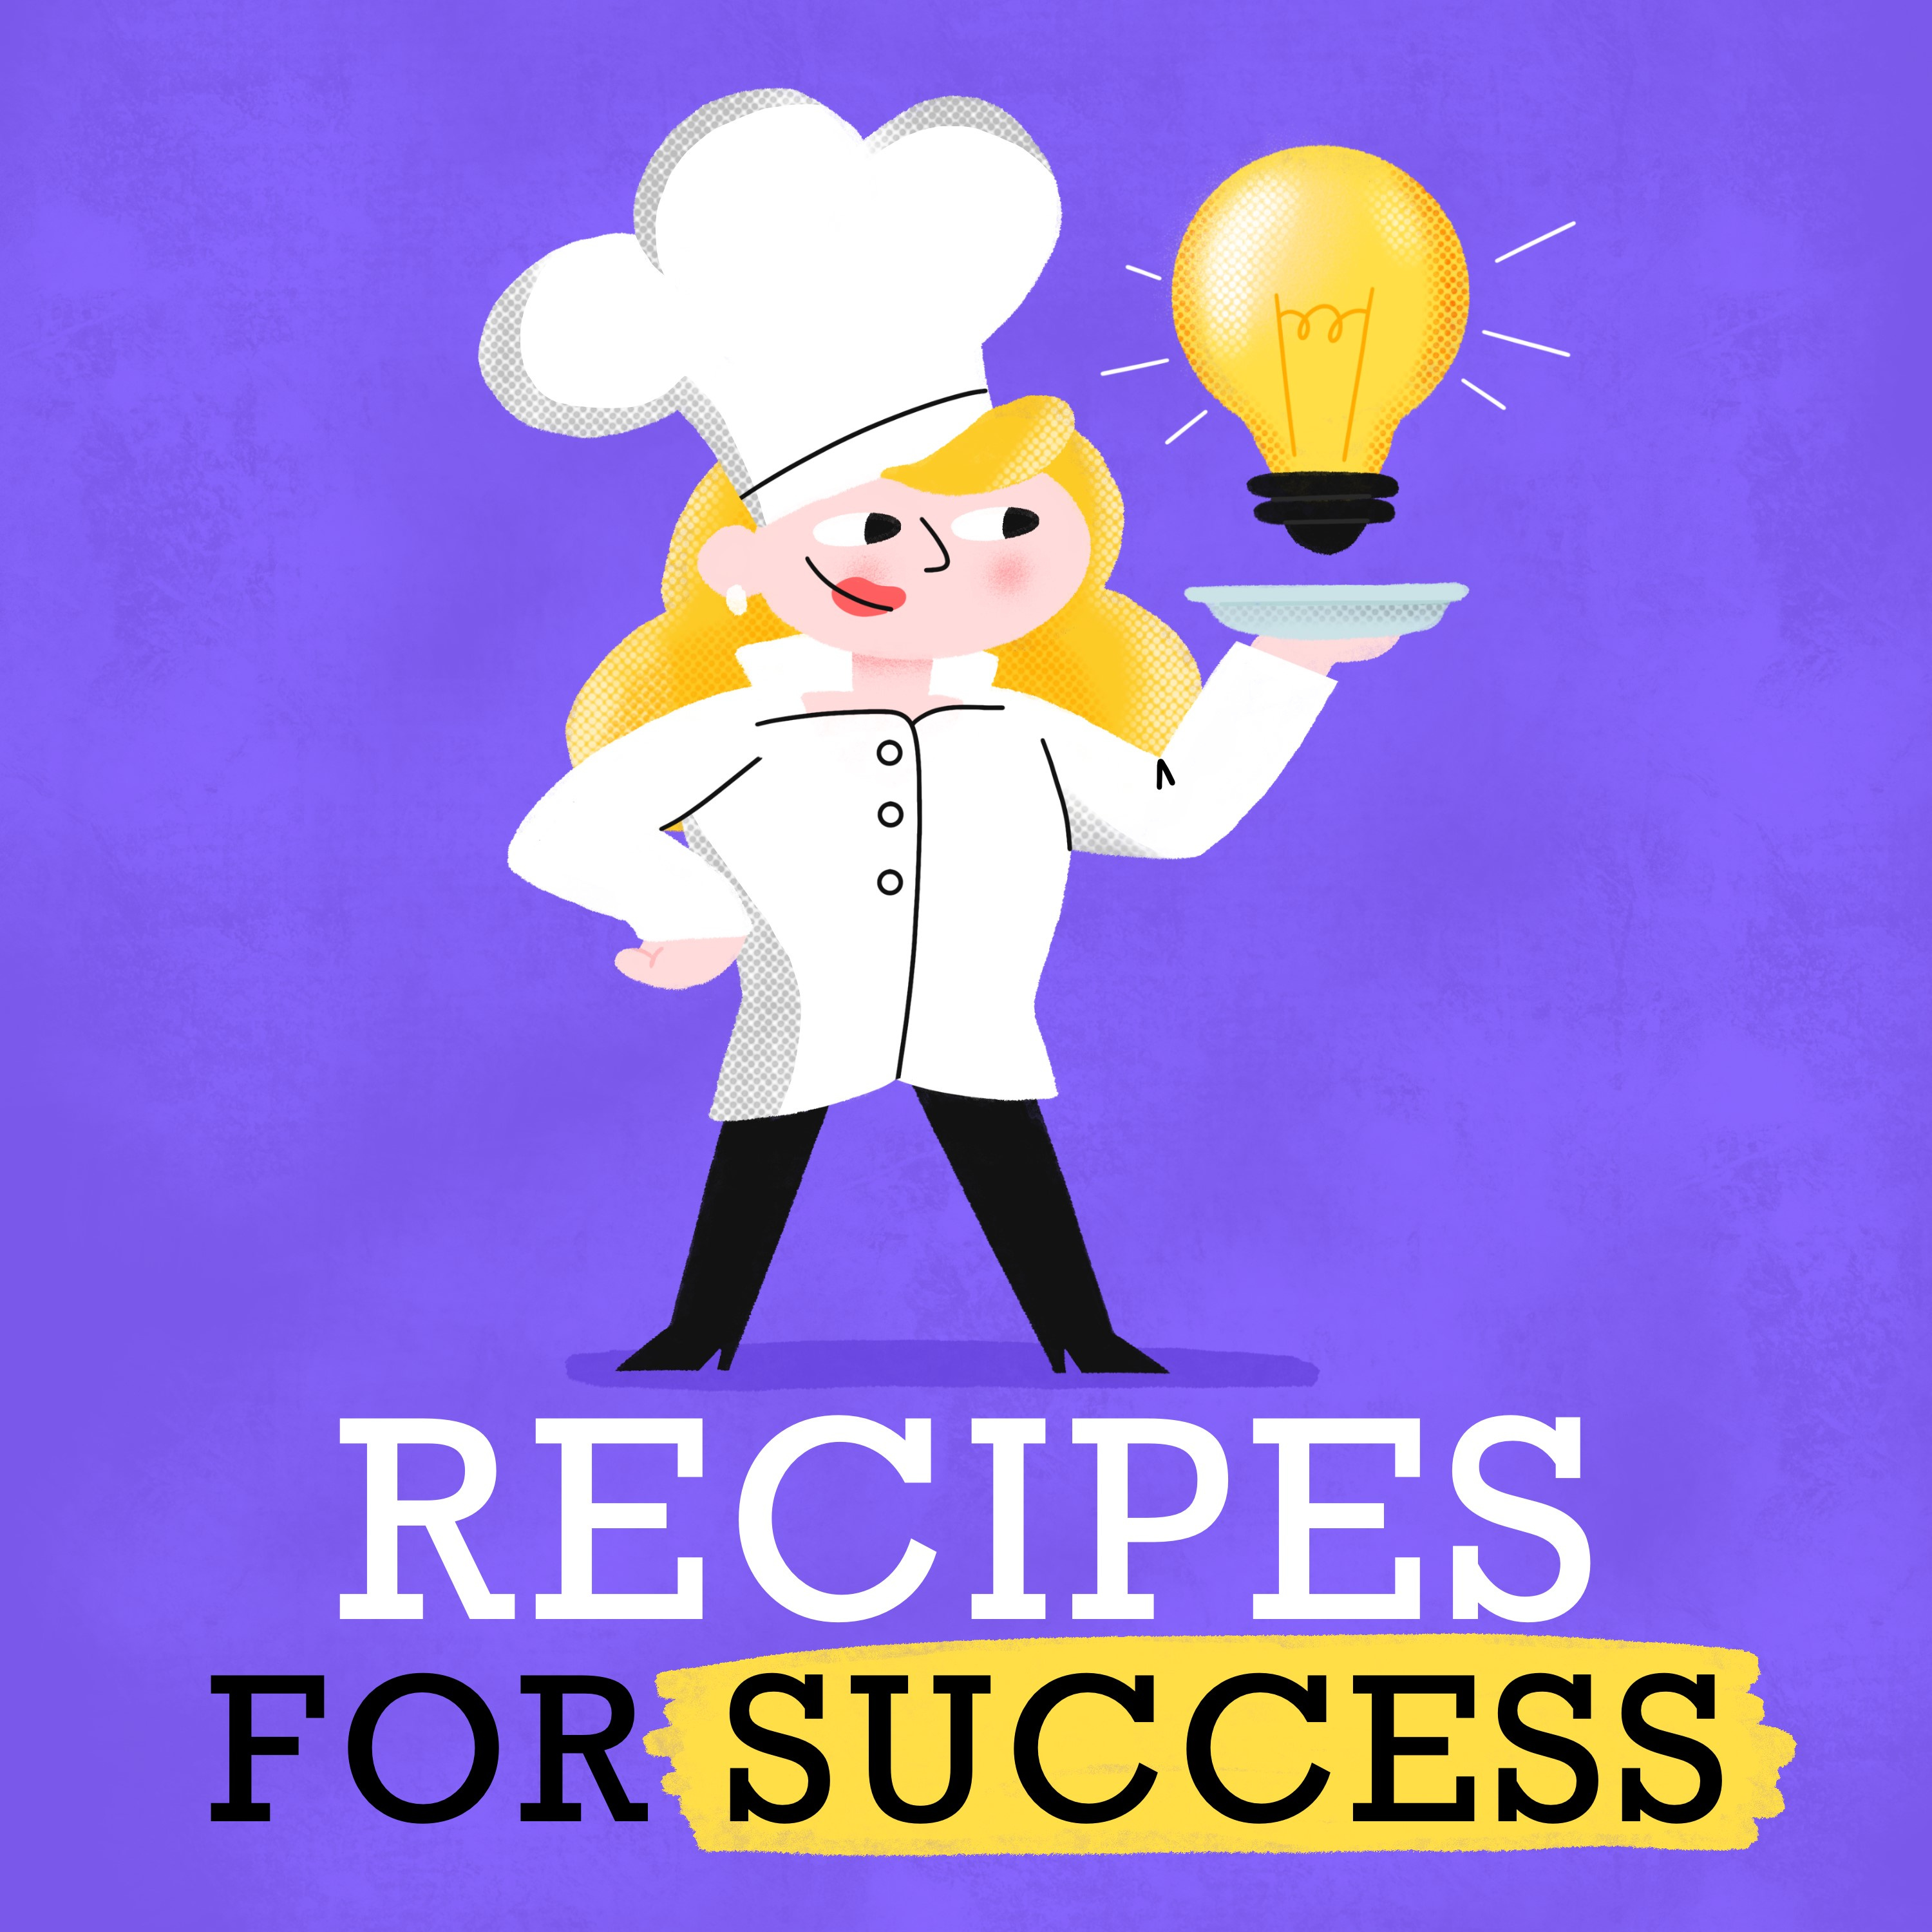 Fresh update on "adhd" discussed on Recipes for Success